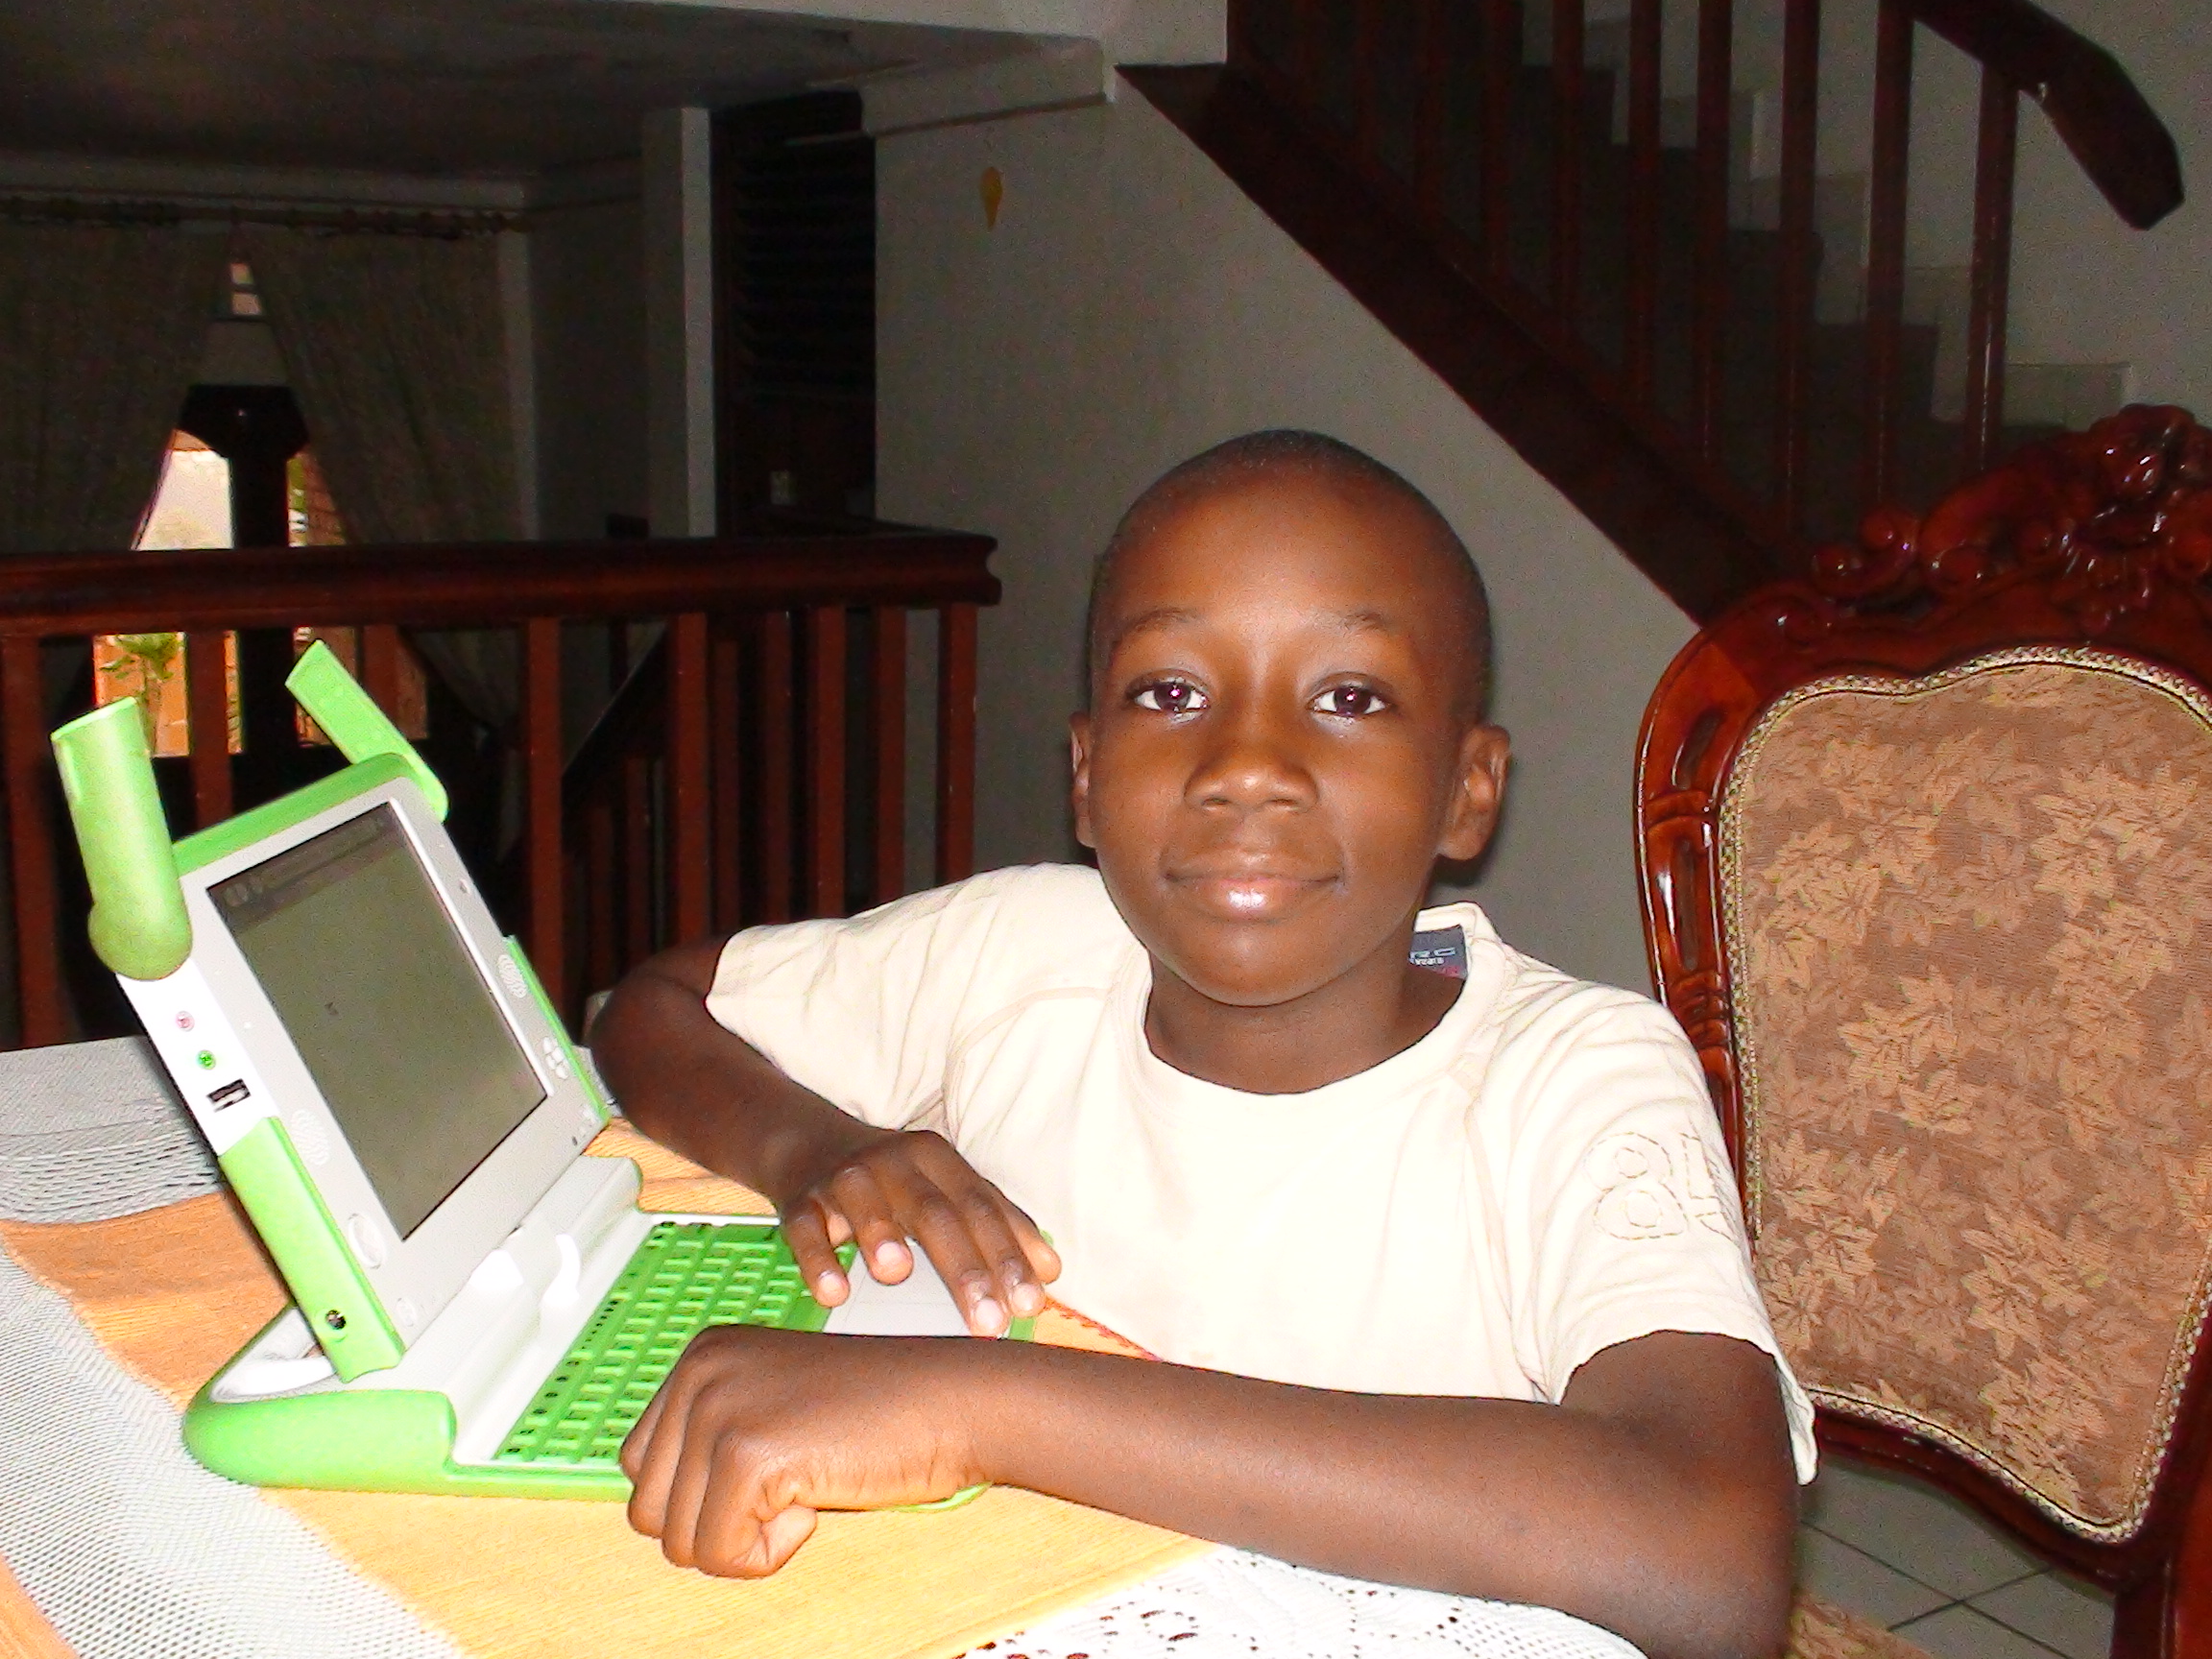 Collin Kabagambe with his laptop